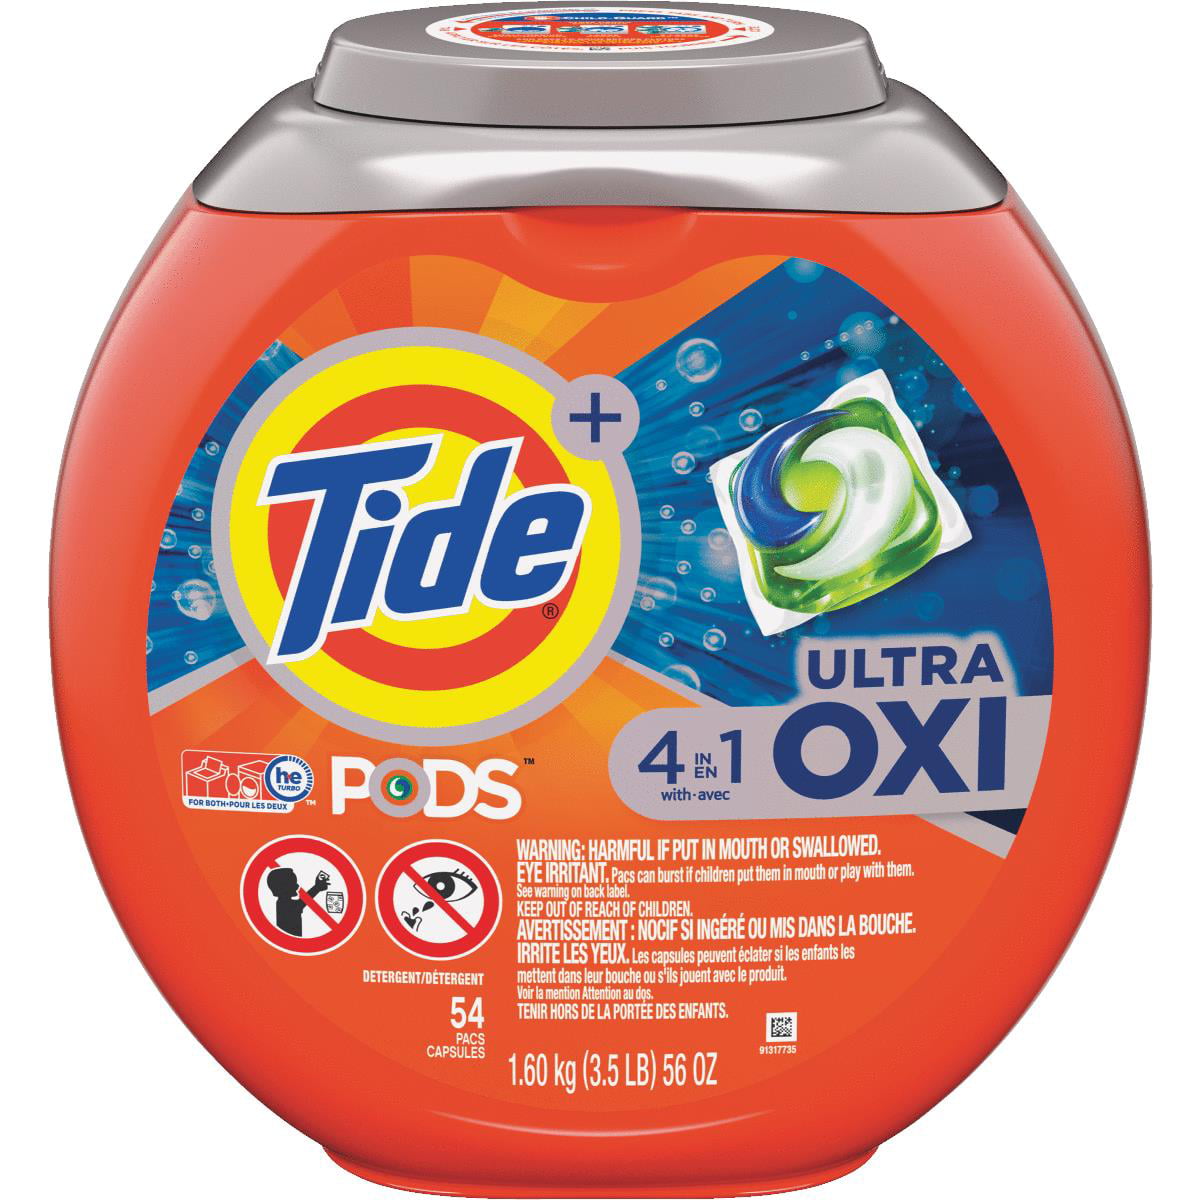  Pods 56 Oz. 54 Loads 4-In-1 Ultra Oxy Laundry Detergent 75076 .